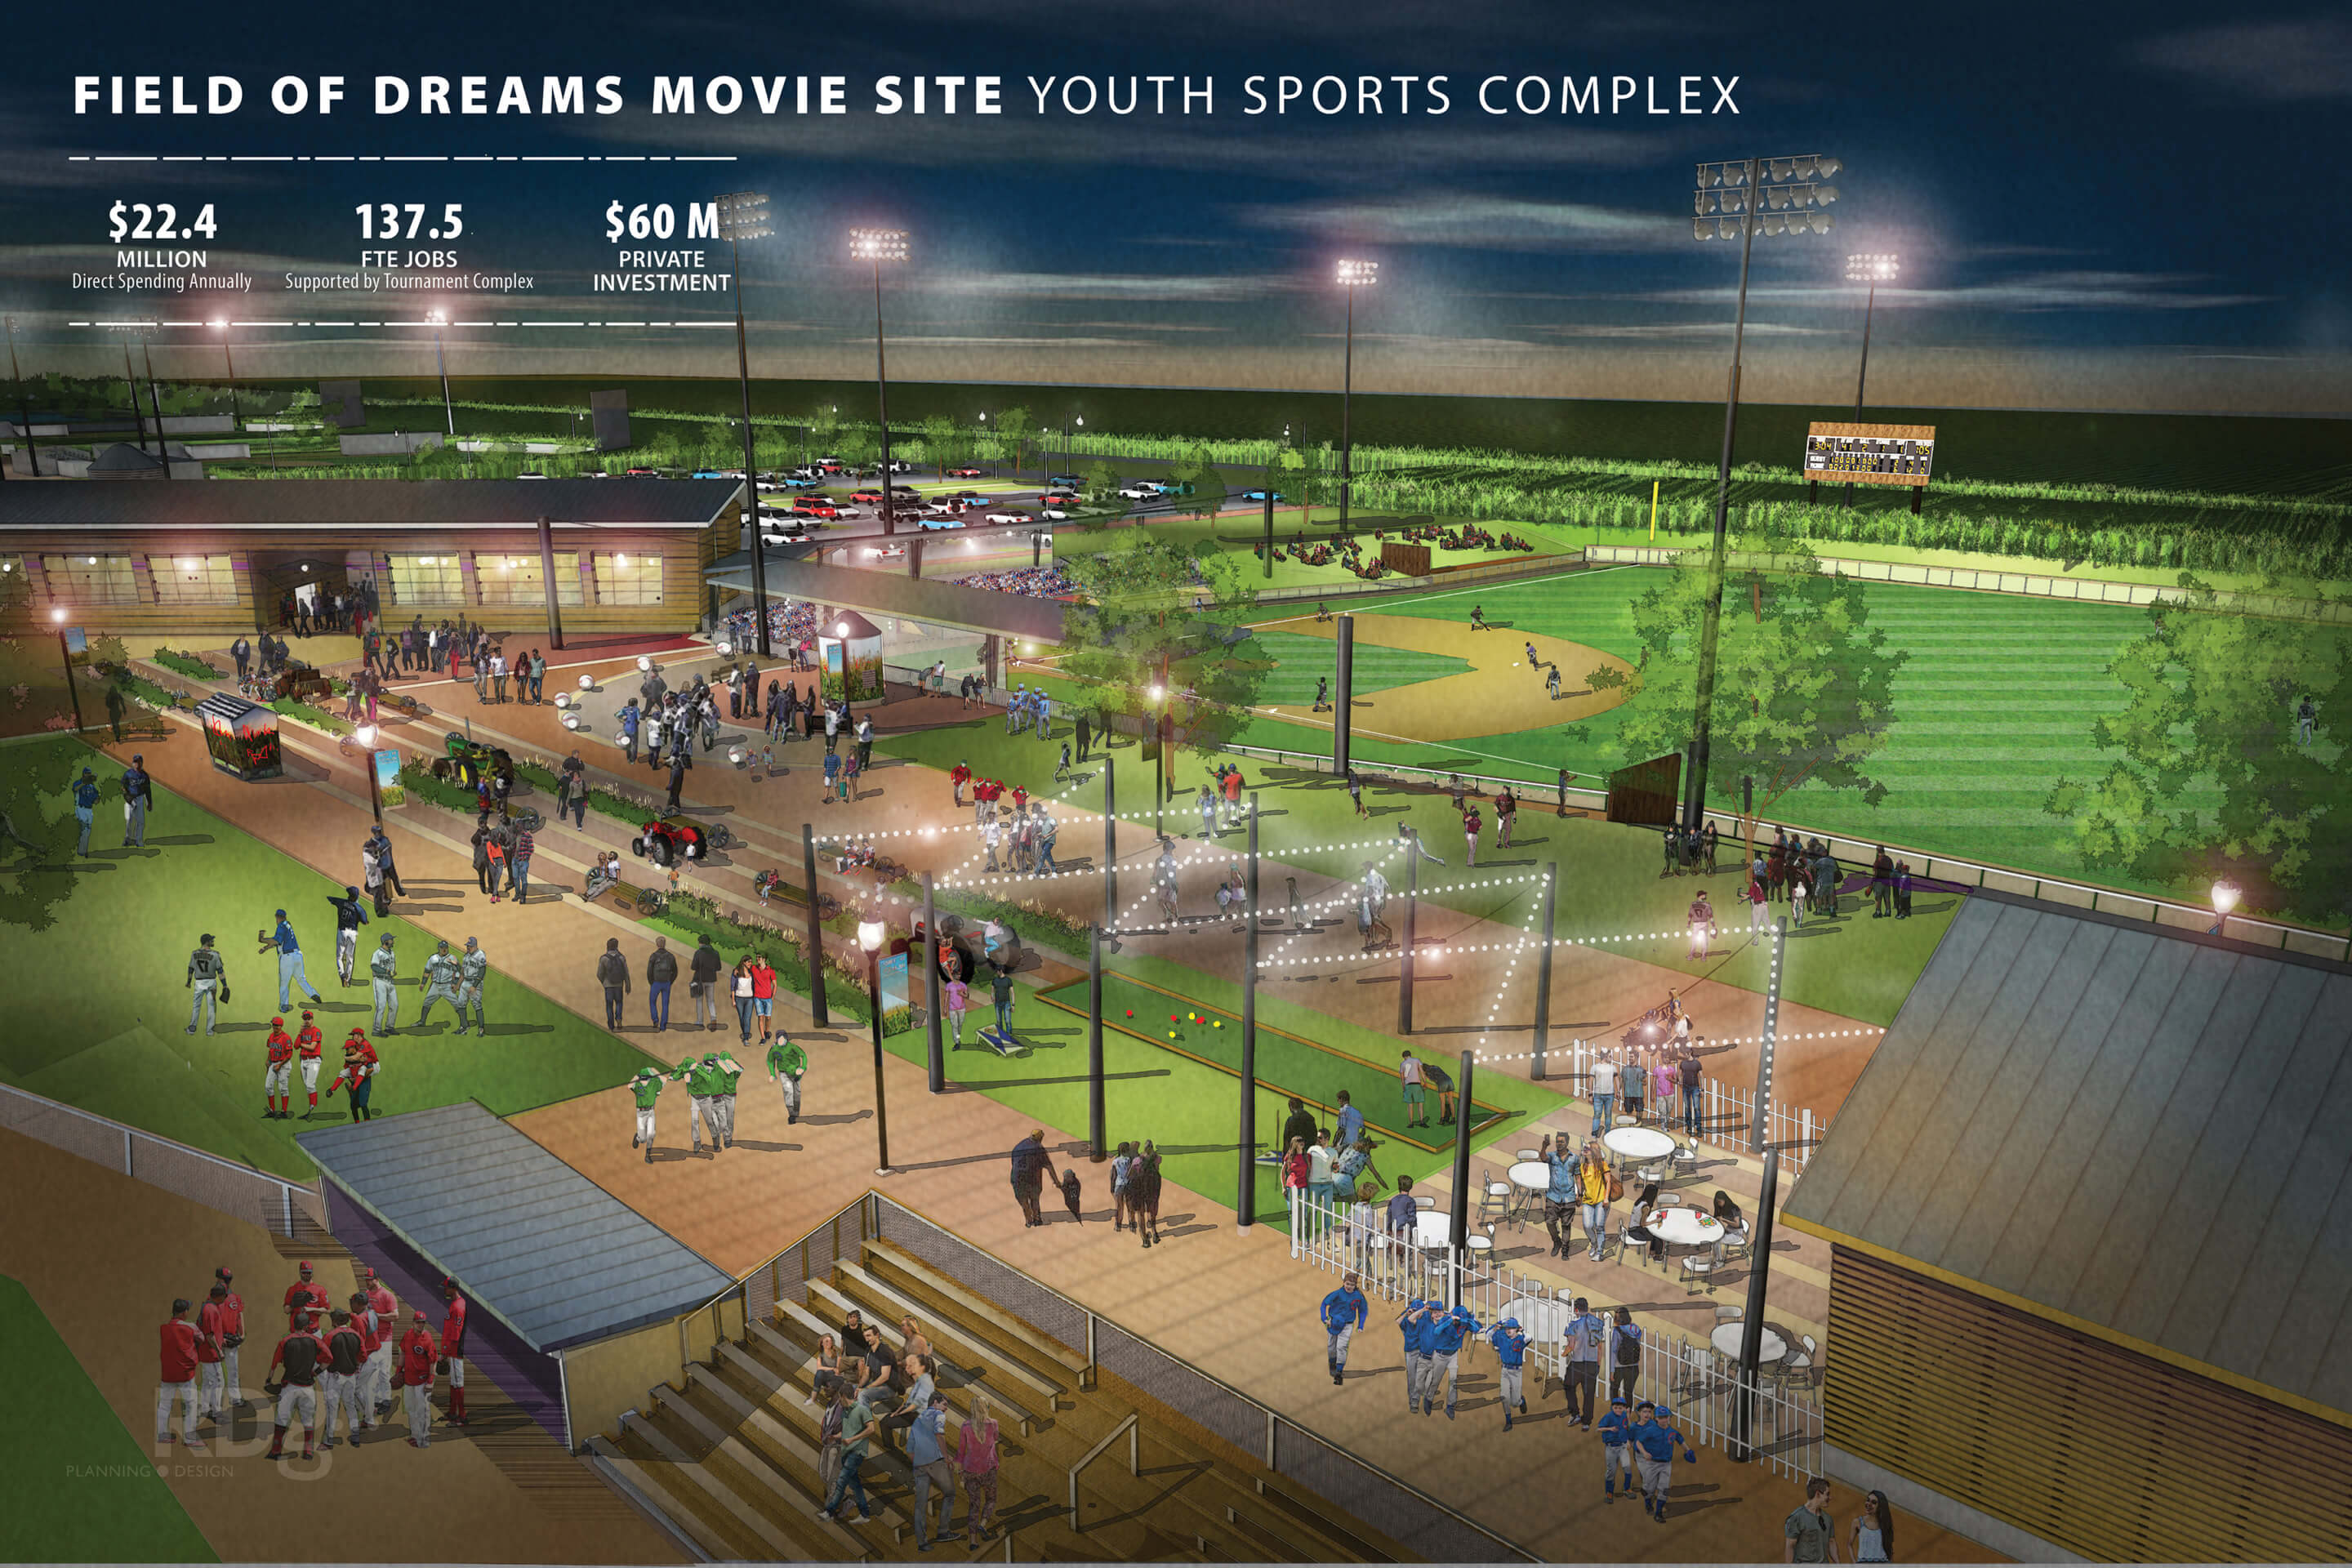 rendering of a youth sports complex